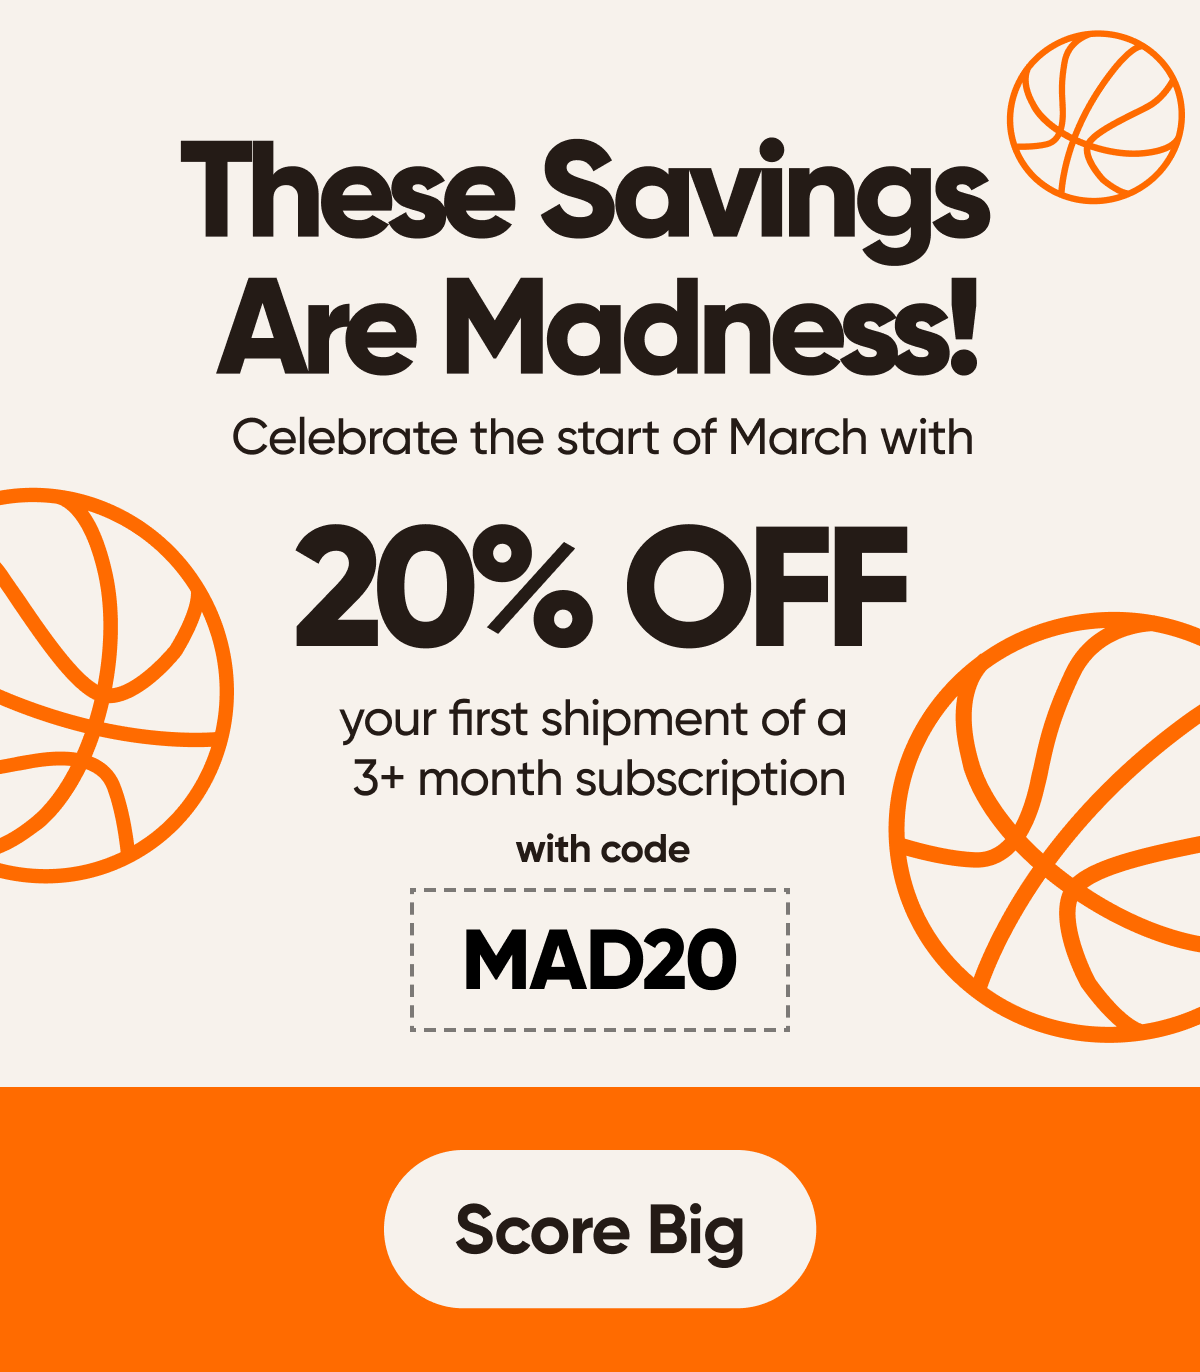 These Savings Are Madness!  Celebrate the start of March with 20% off your first shipment of a 3+ month subscription with code MAD20 Score Big